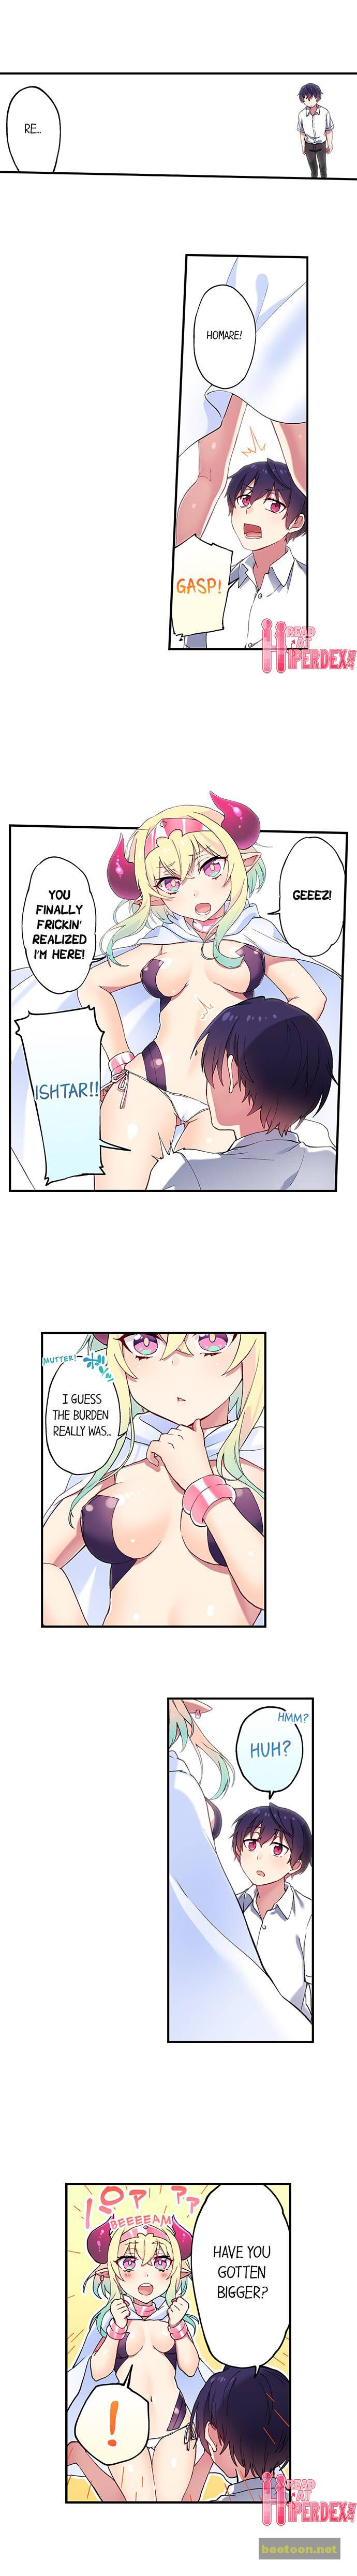 I Can See The Number Of Times People Orgasm Chapter 106 - MyToon.net